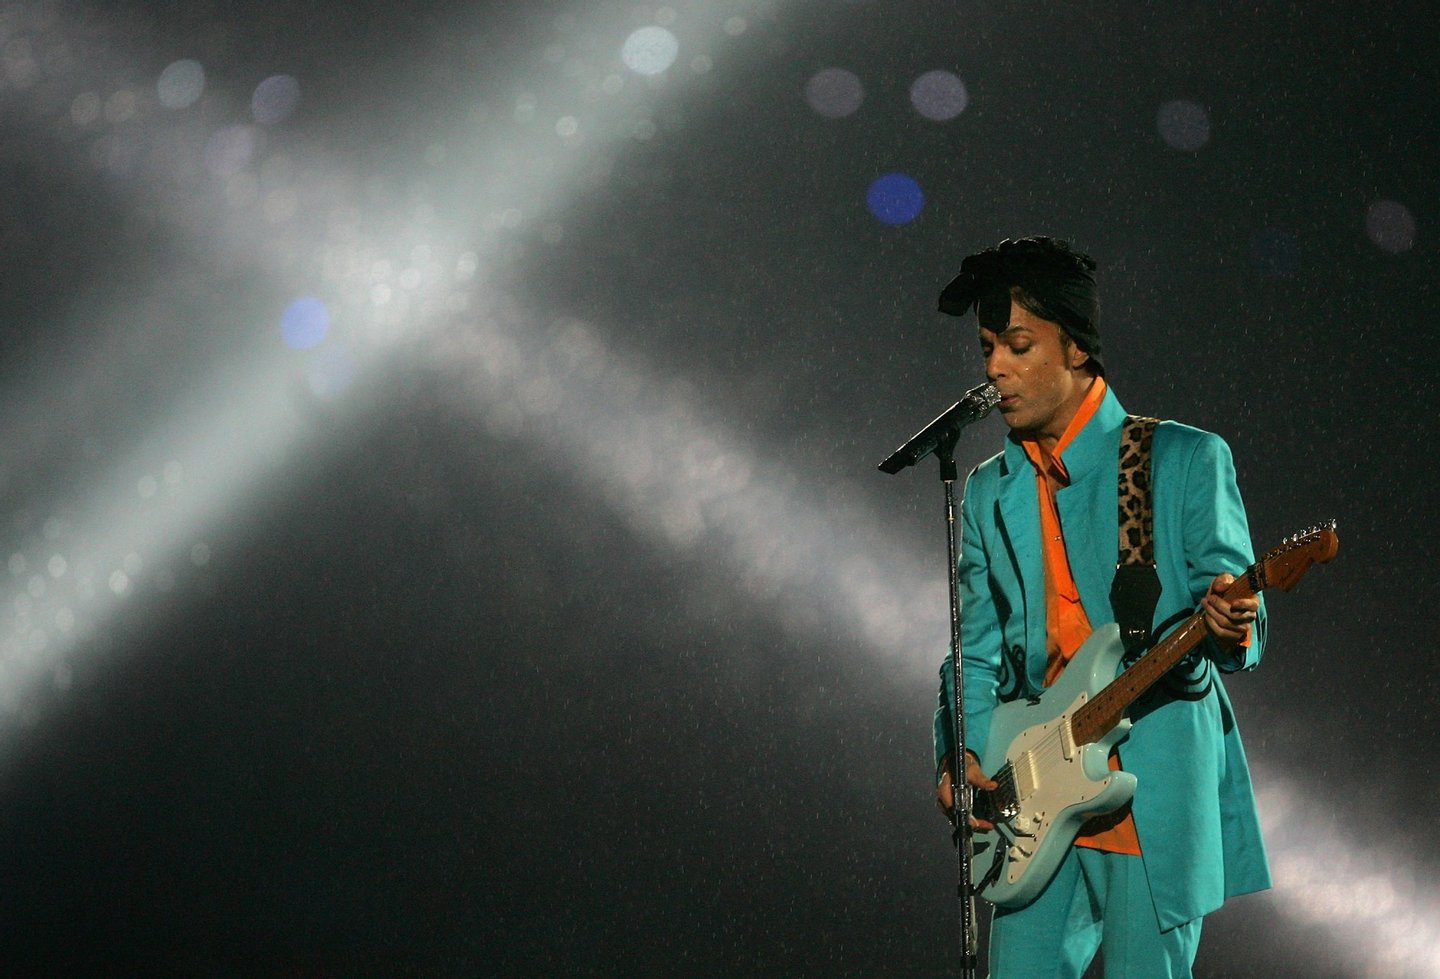 MIAMI GARDENS, FL - FEBRUARY 04: Musician Prince performs during the "Pepsi Halftime Show" at Super Bowl XLI between the Indianapolis Colts and the Chicago Bears on February 4, 2007 at Dolphin Stadium in Miami Gardens, Florida. (Photo by Doug Pensinger/Getty Images)